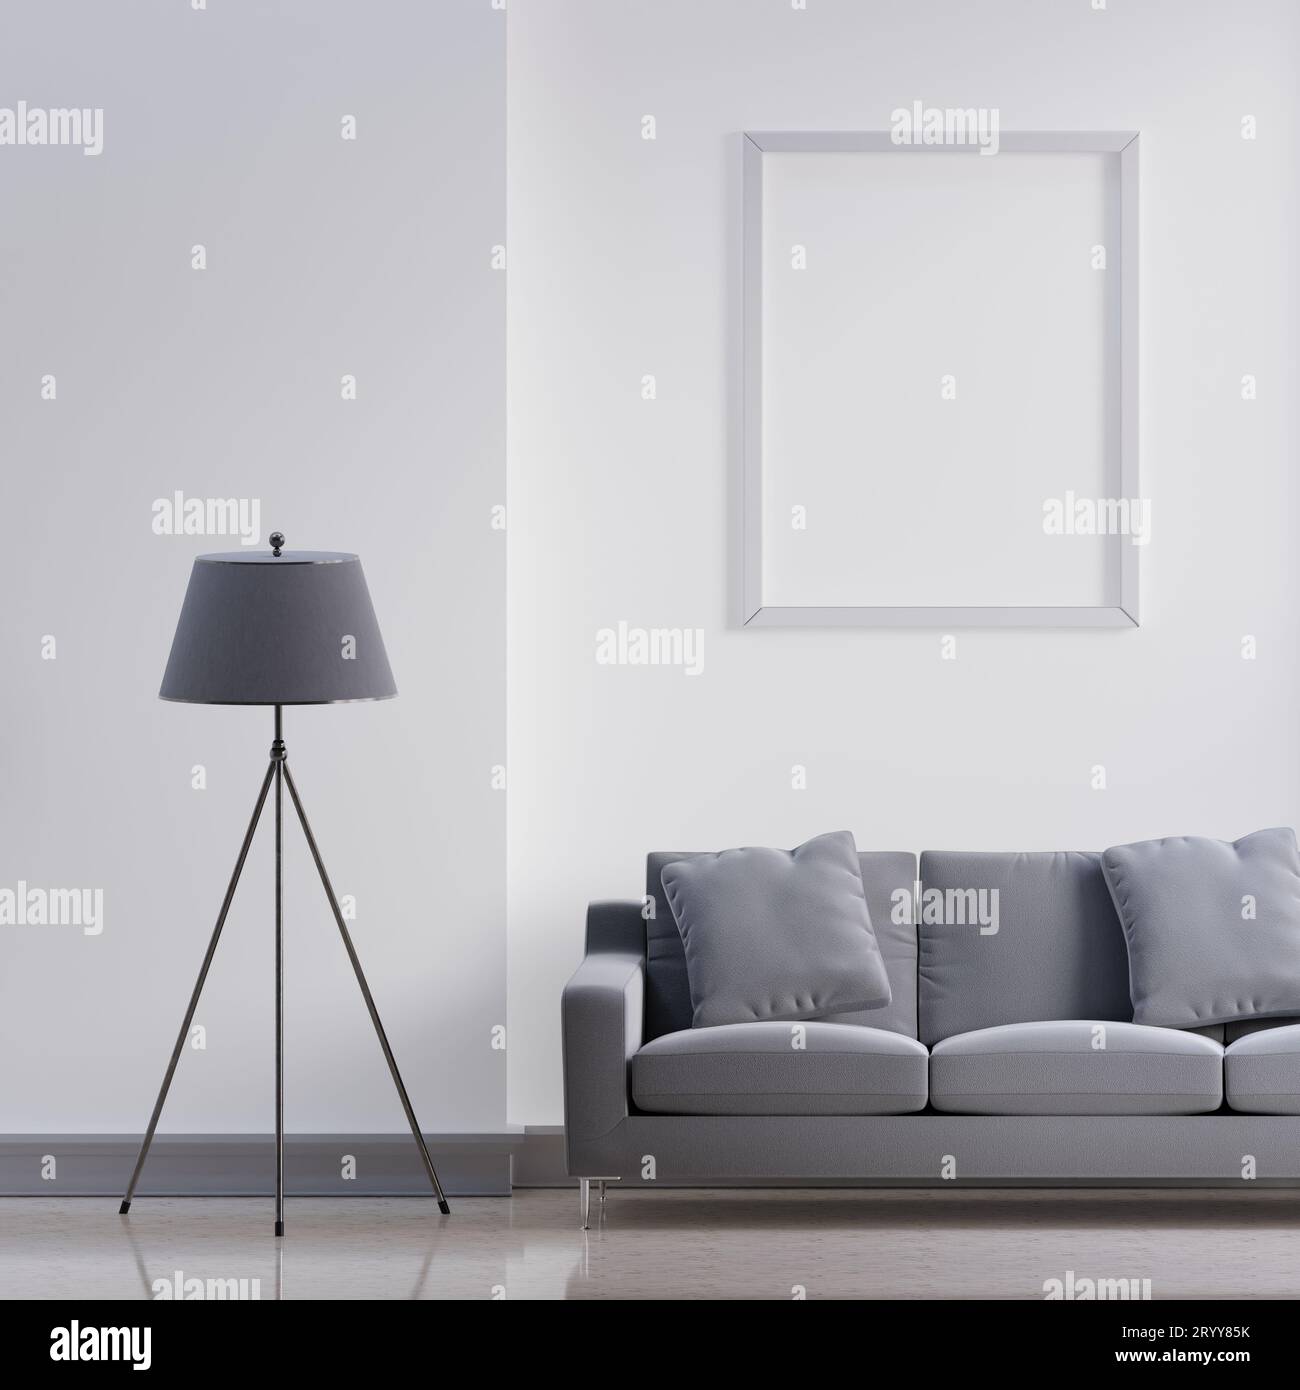 Luxury modern interior of white and gray tone living room home decor concept background. Three legs electric lamp and empty pict Stock Photo